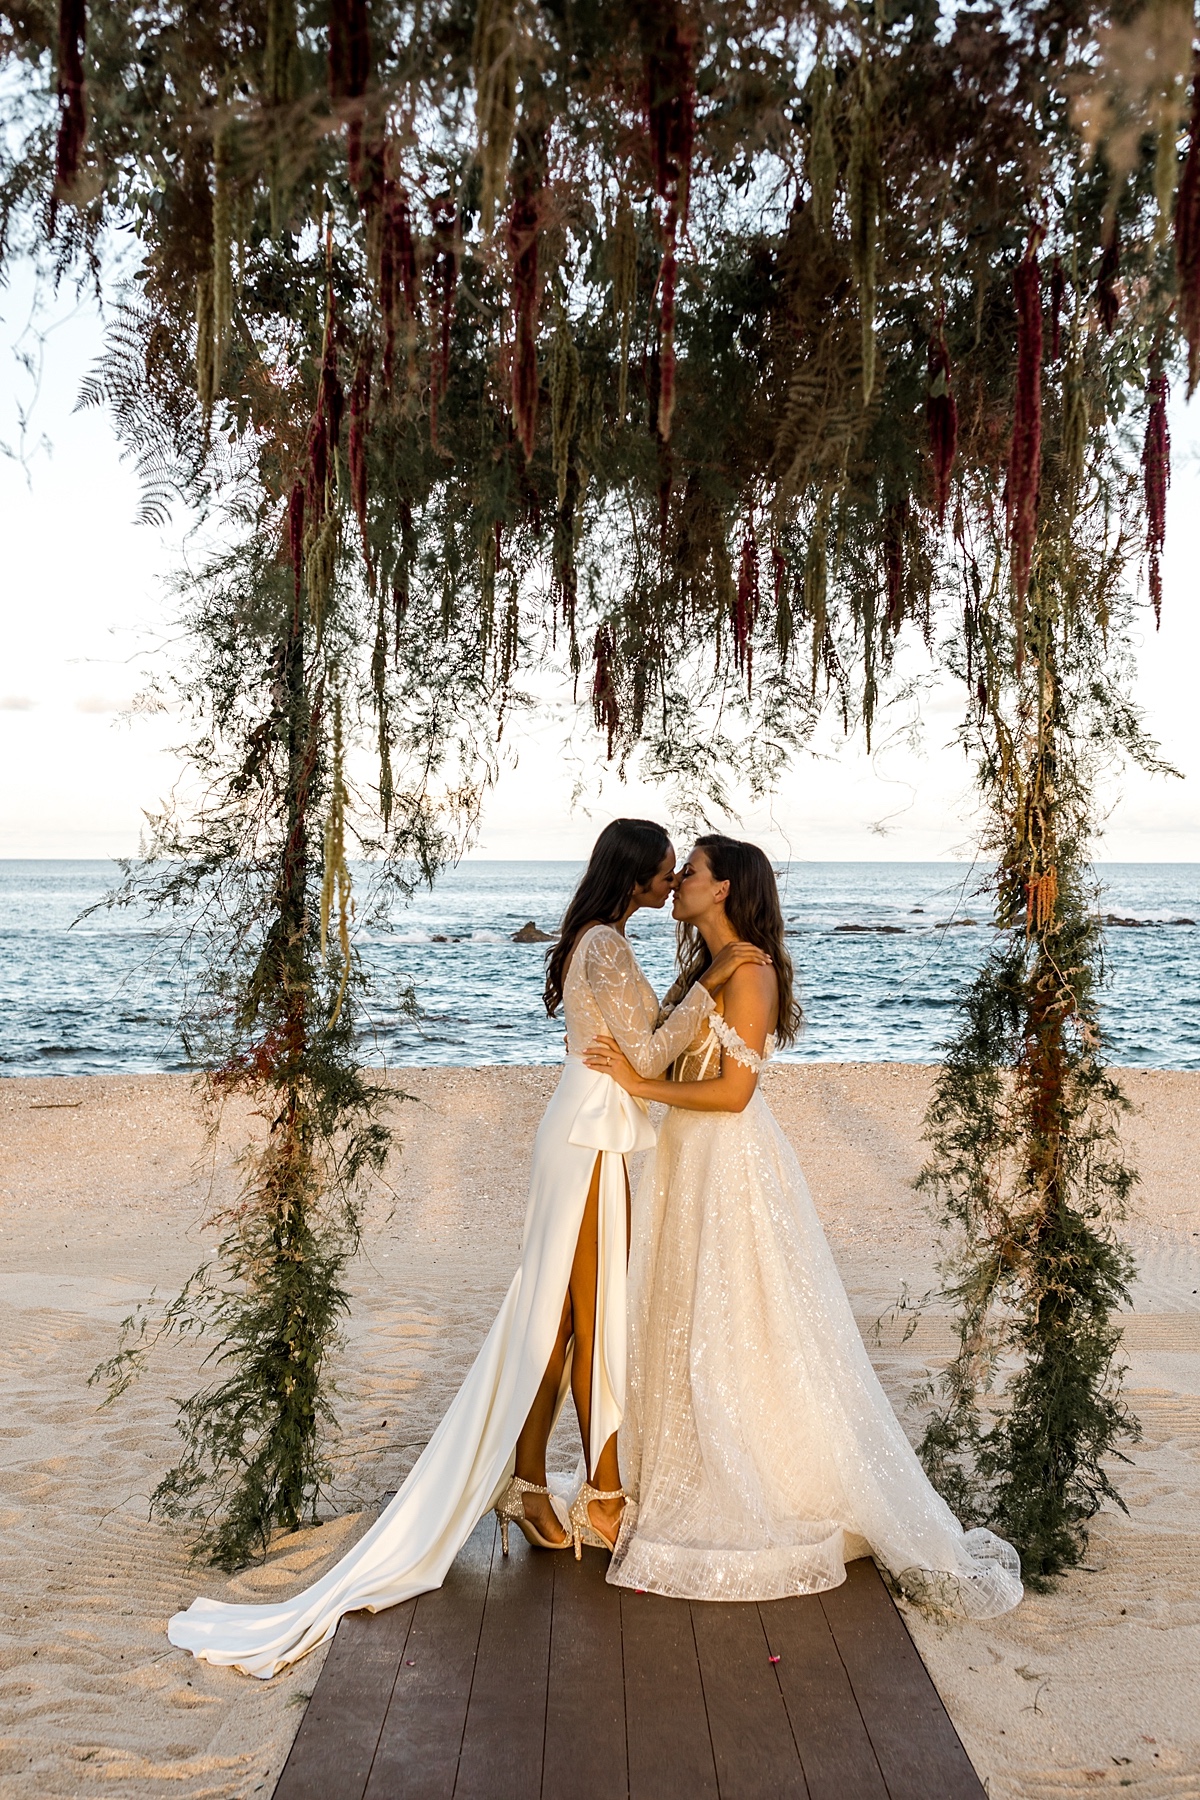 Both Brides Shine In This Eclectic Elopement Inspiration